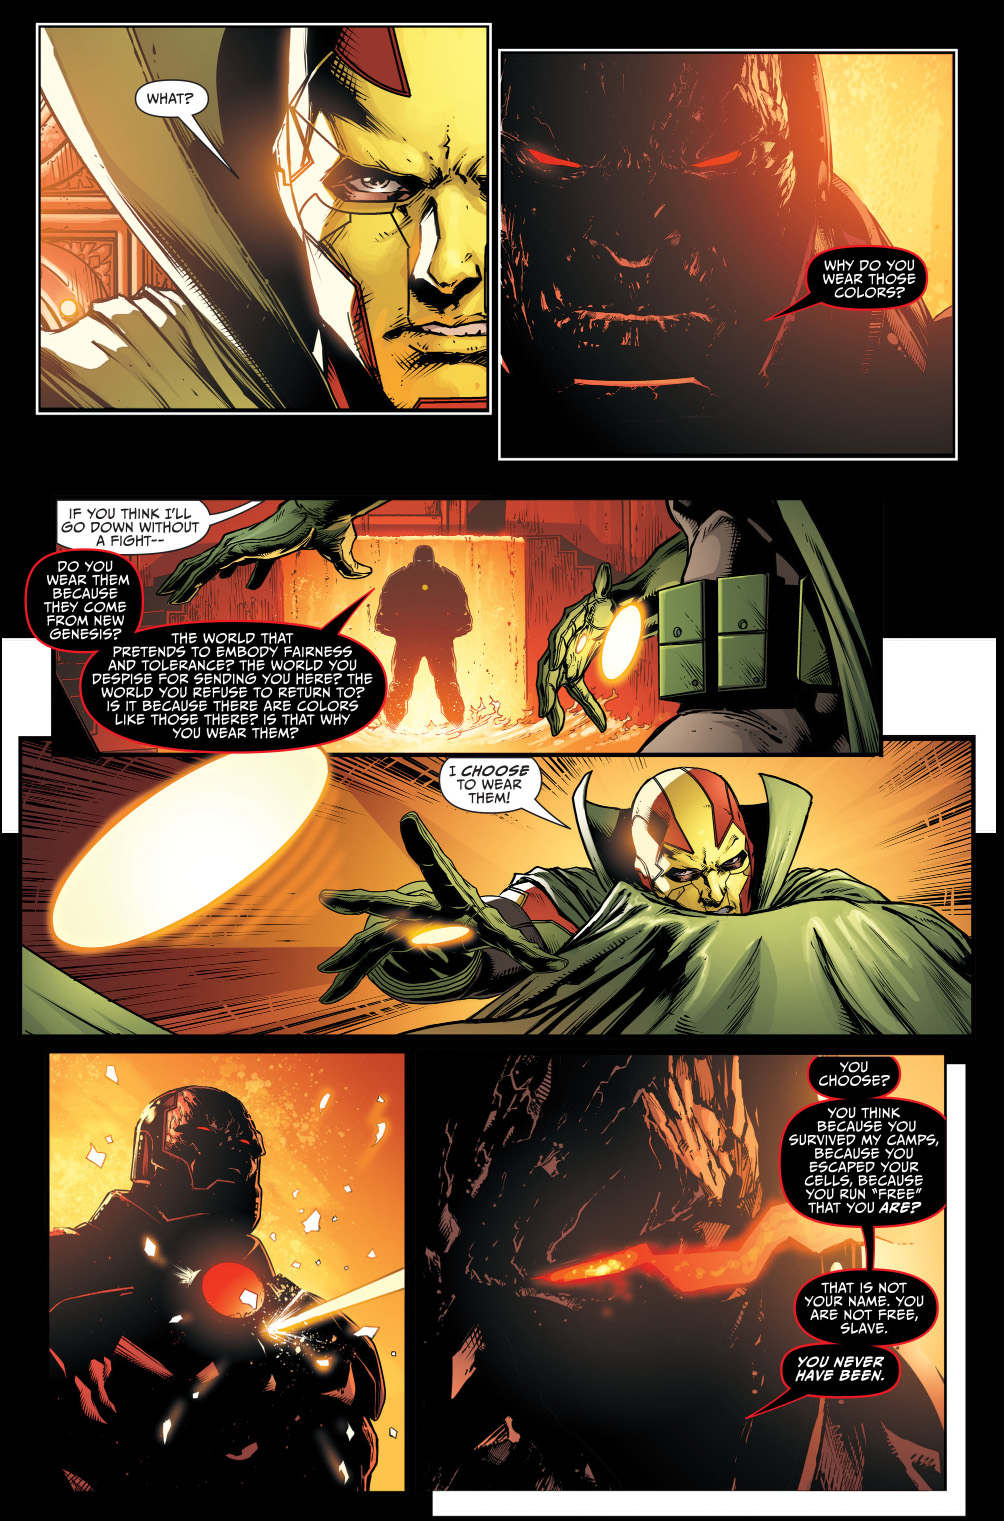 mister miracle vs darkseid (justice league)